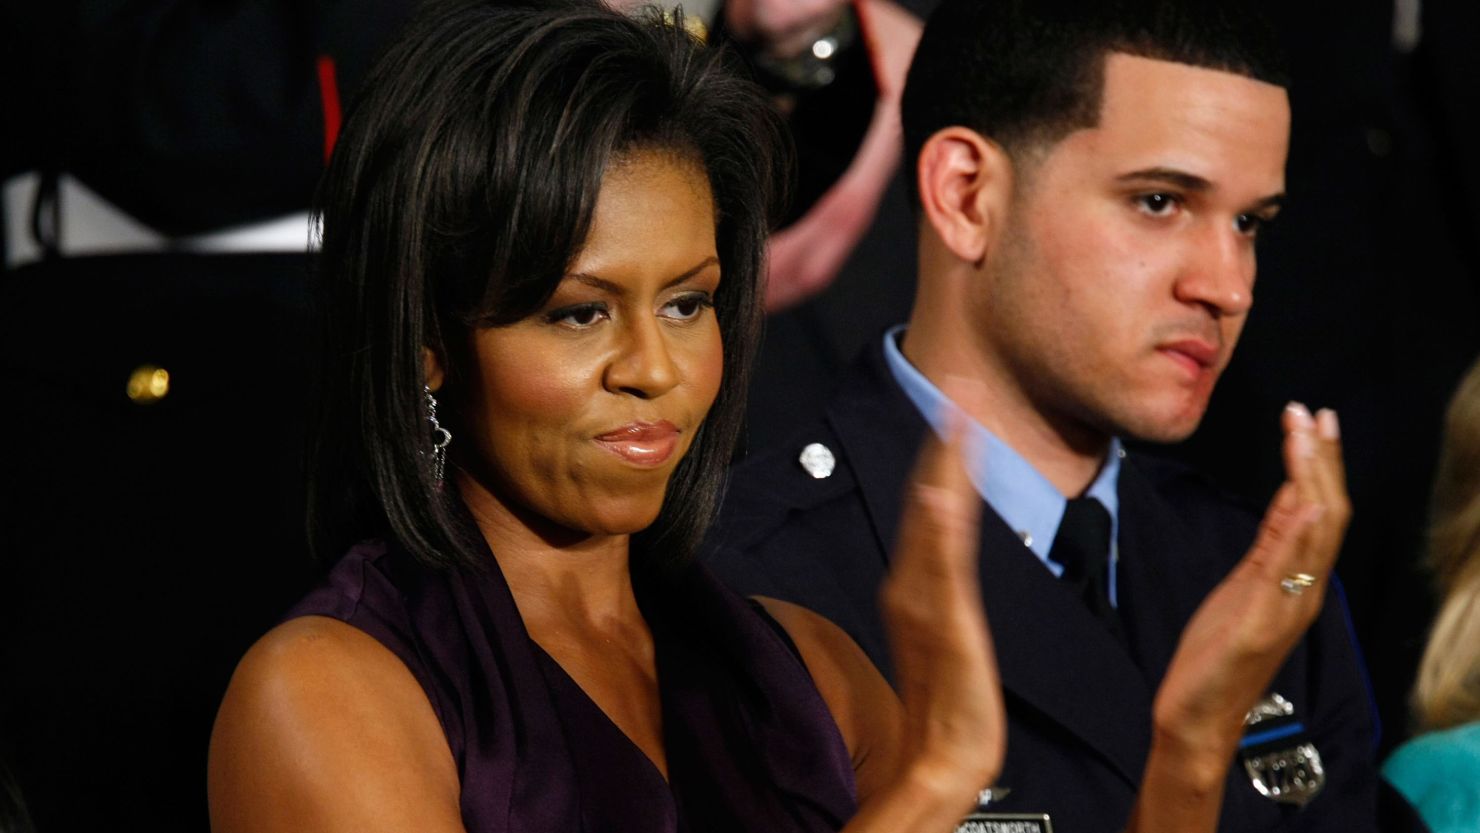 Officer Richard DeCoatsworth stands beside Michelle Obama during a presidential speech in 2009.